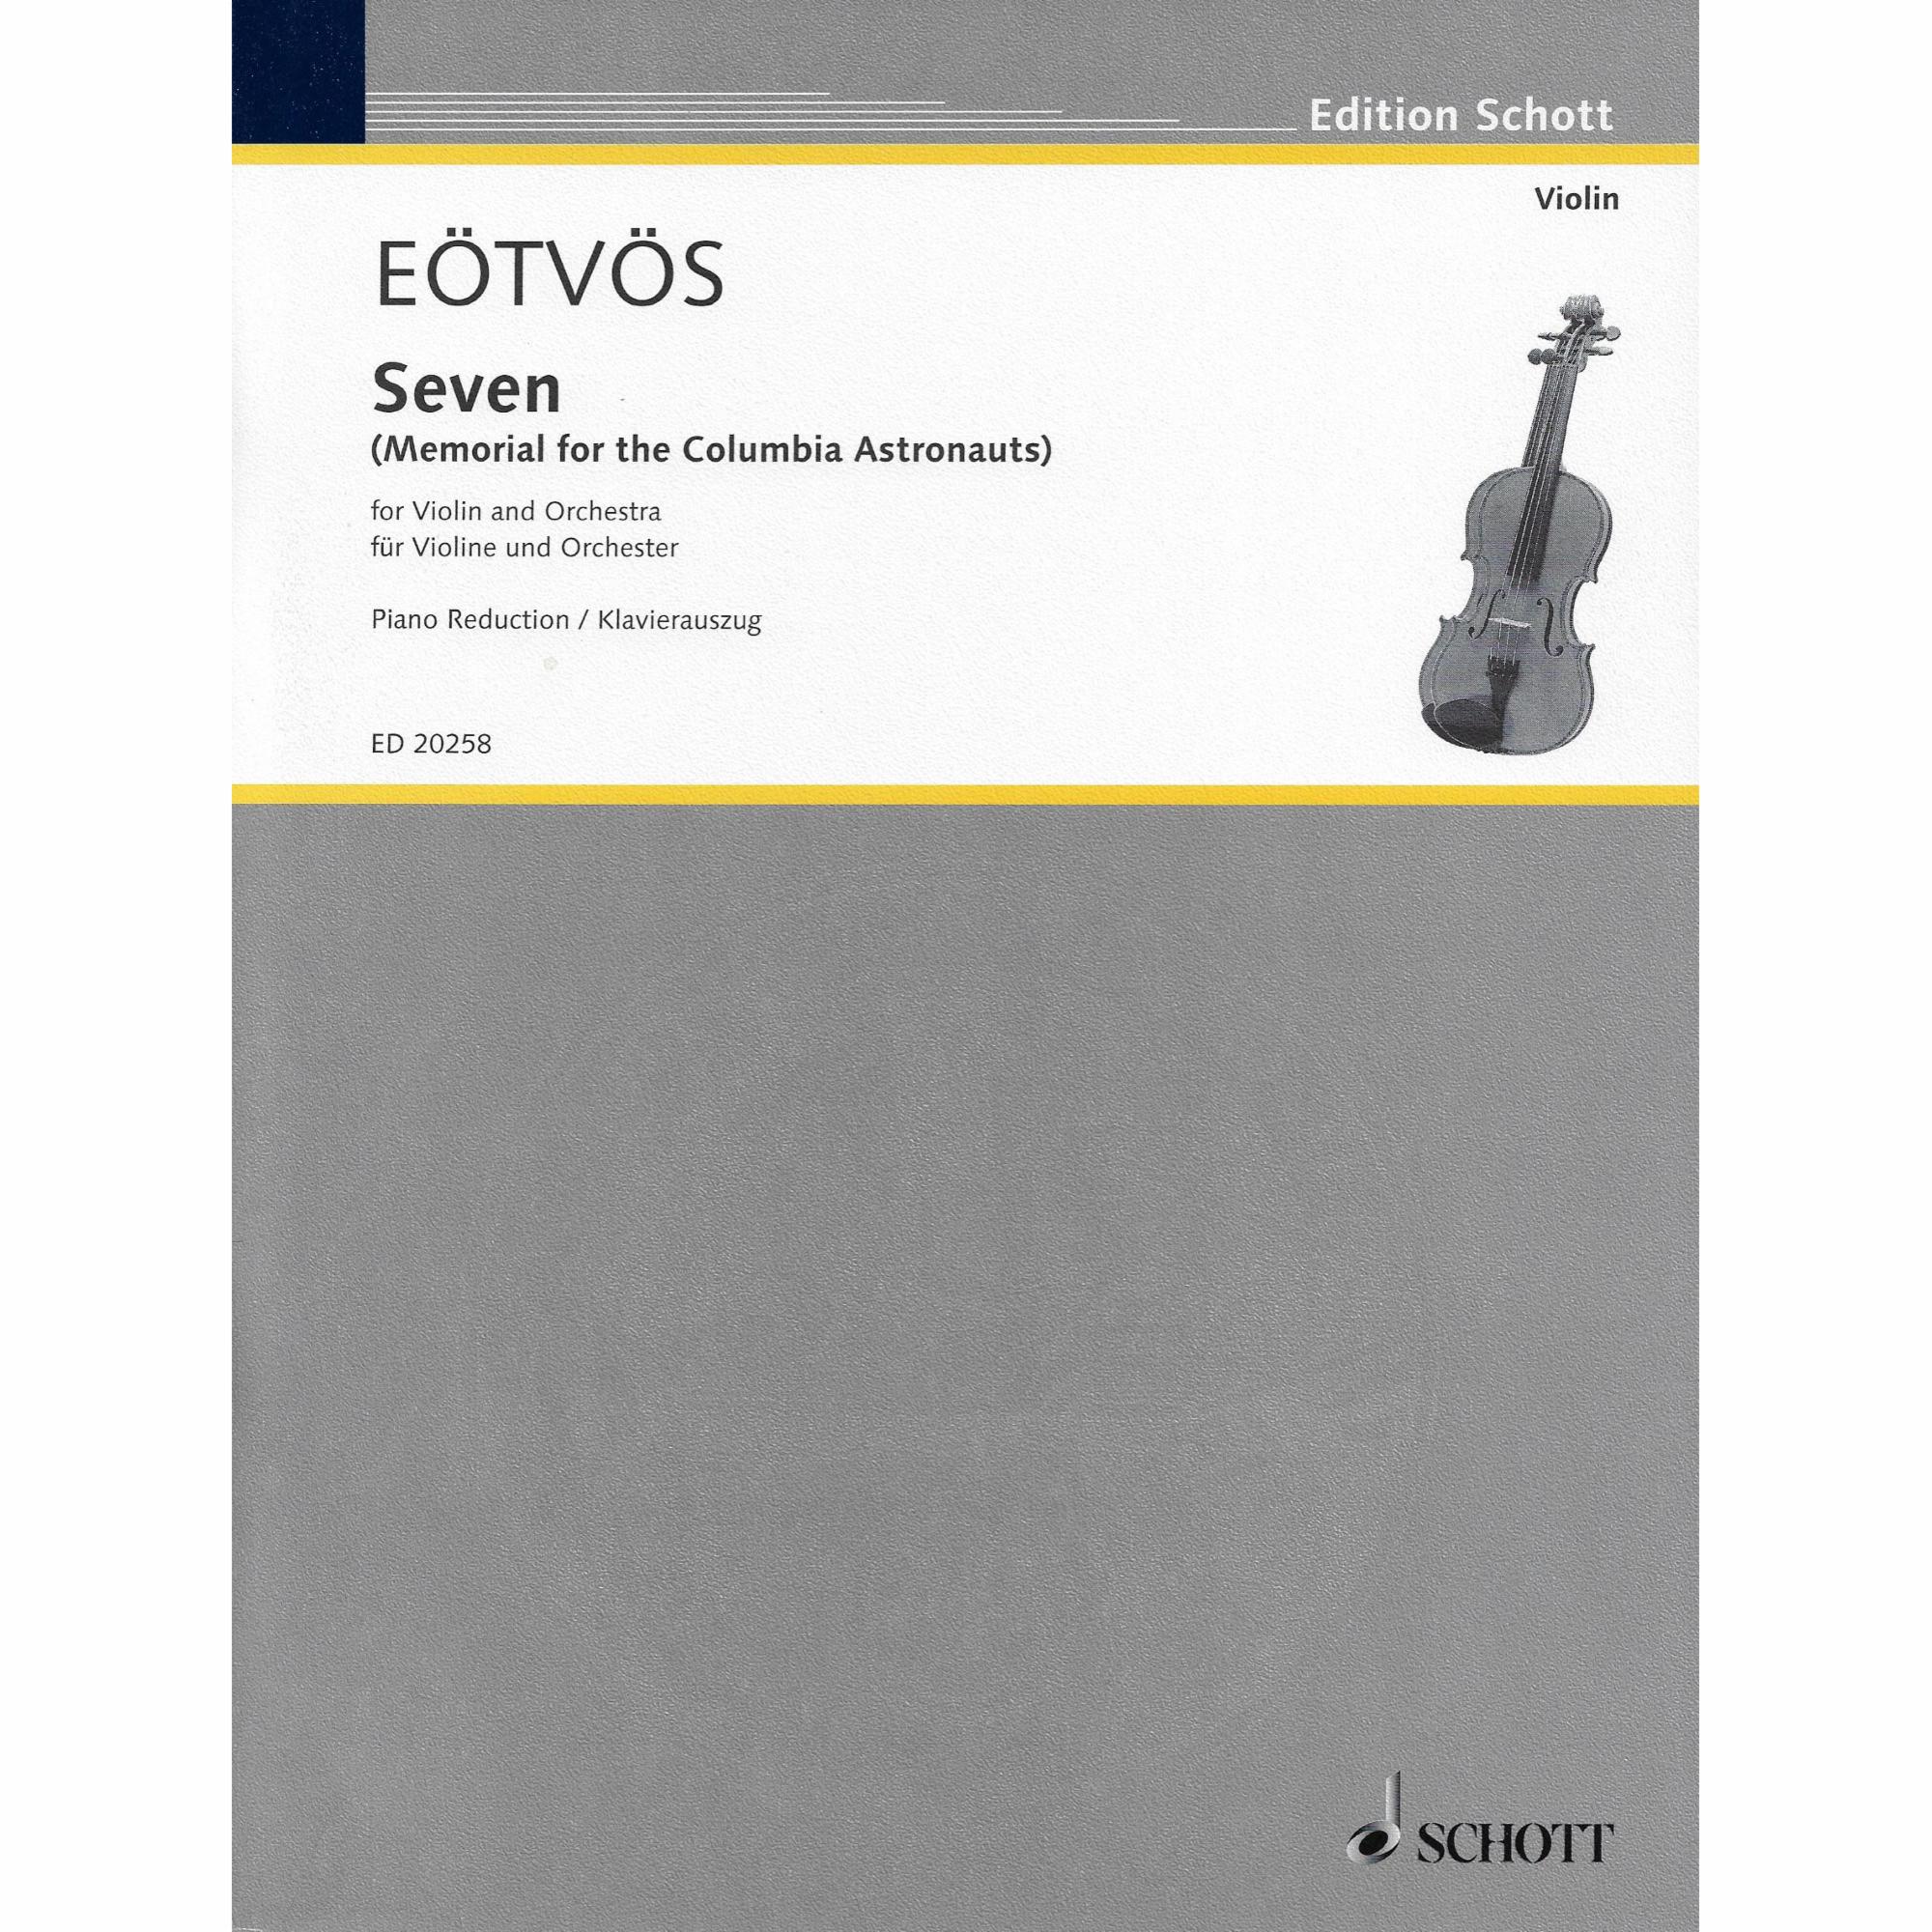 Eotvos -- Seven: Memorial for the Columbia Astronauts for Violin and Piano